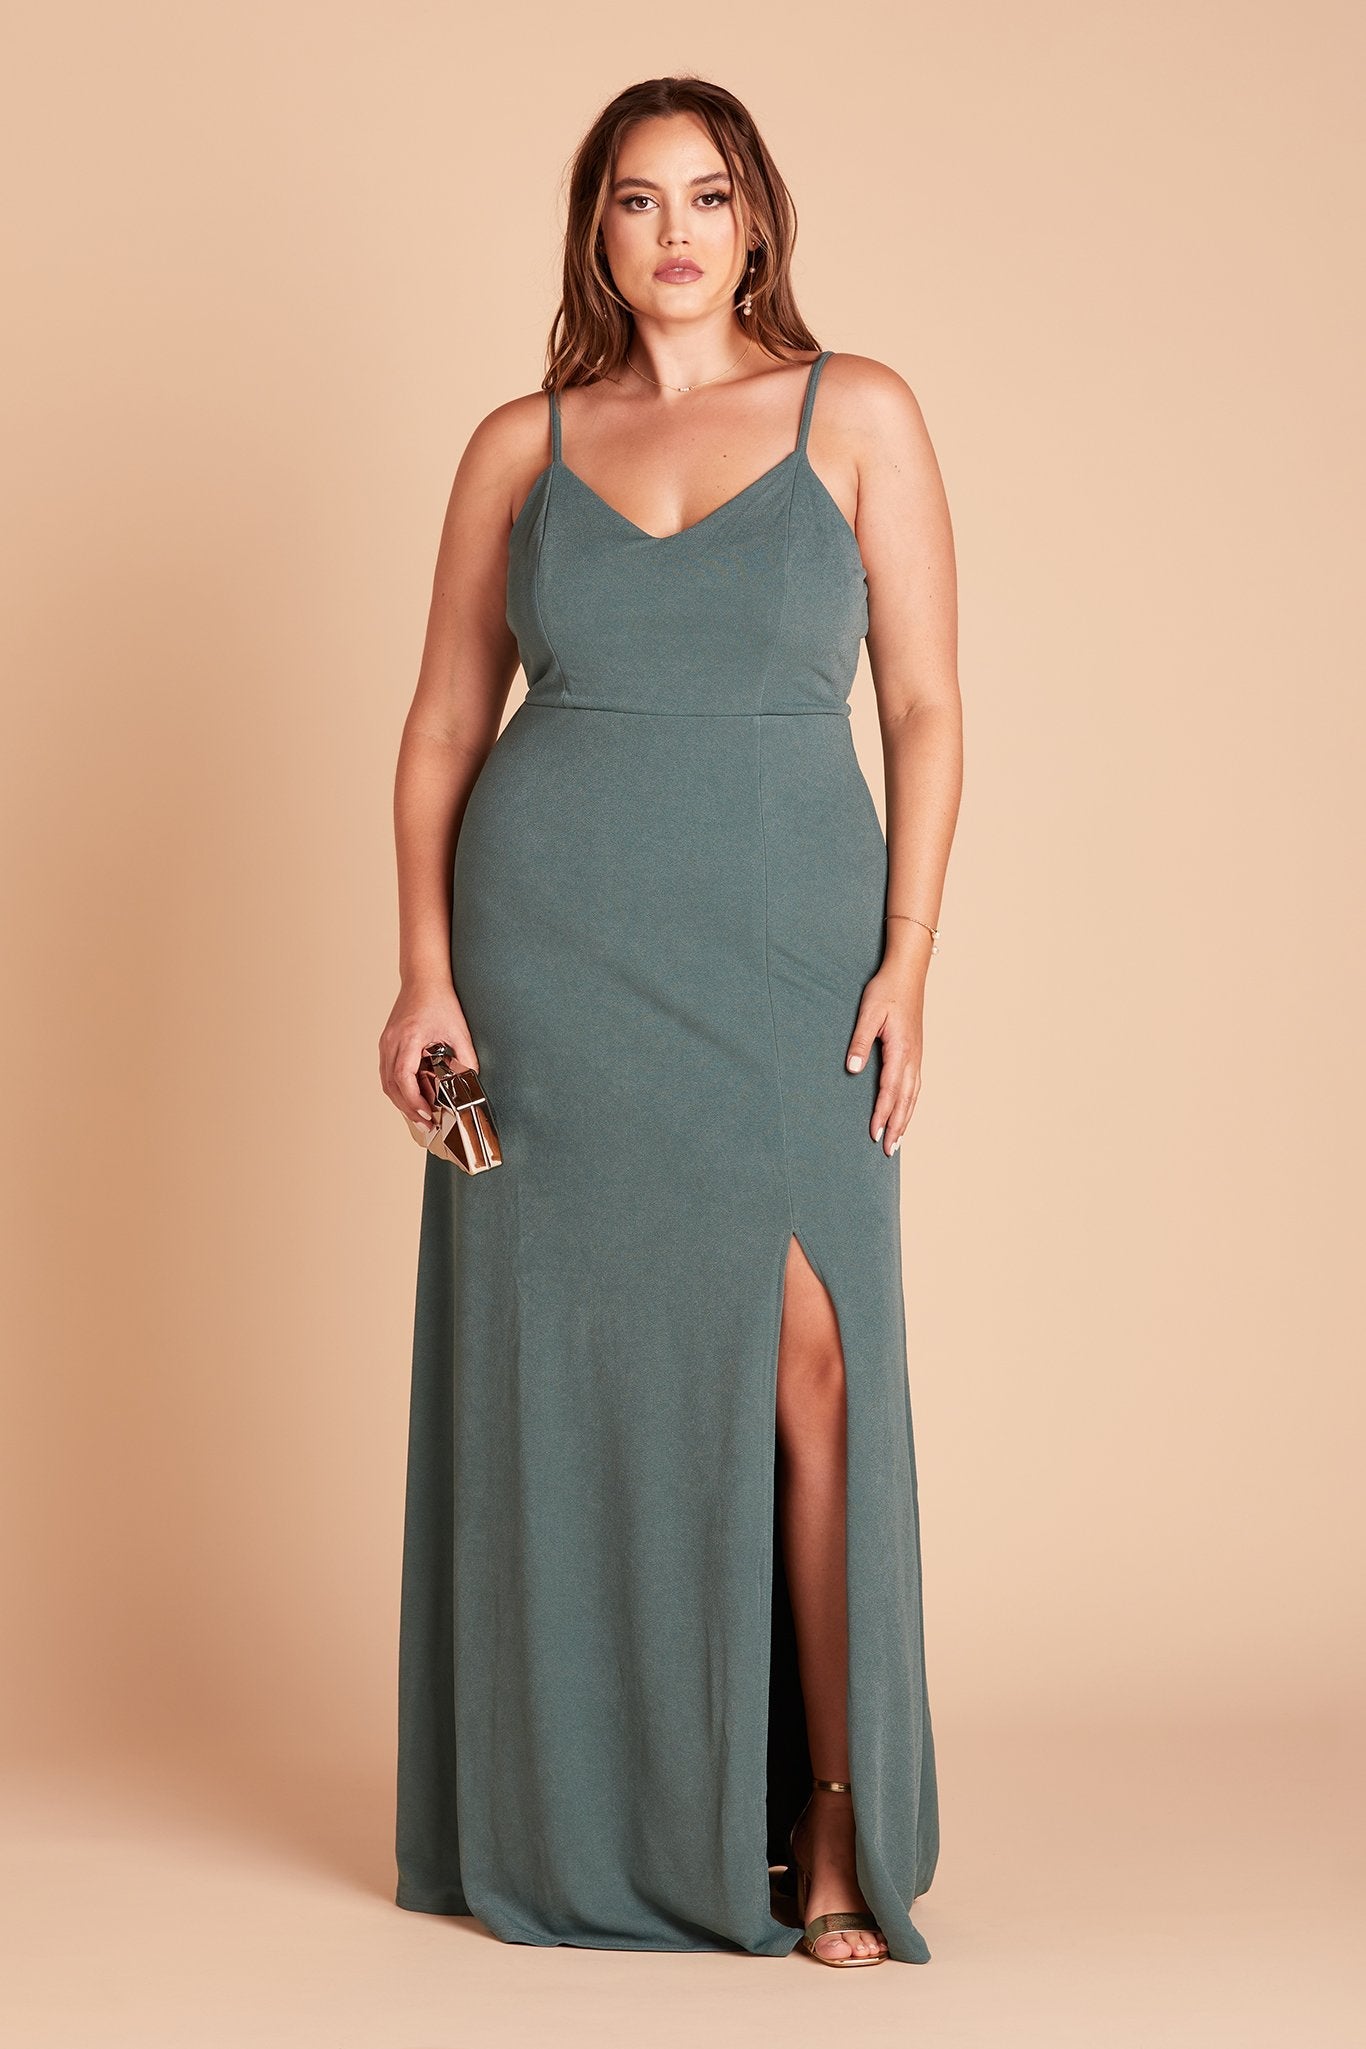 Jay plus size bridesmaid dress with slit in sea glass green crepe by Birdy Grey, front view